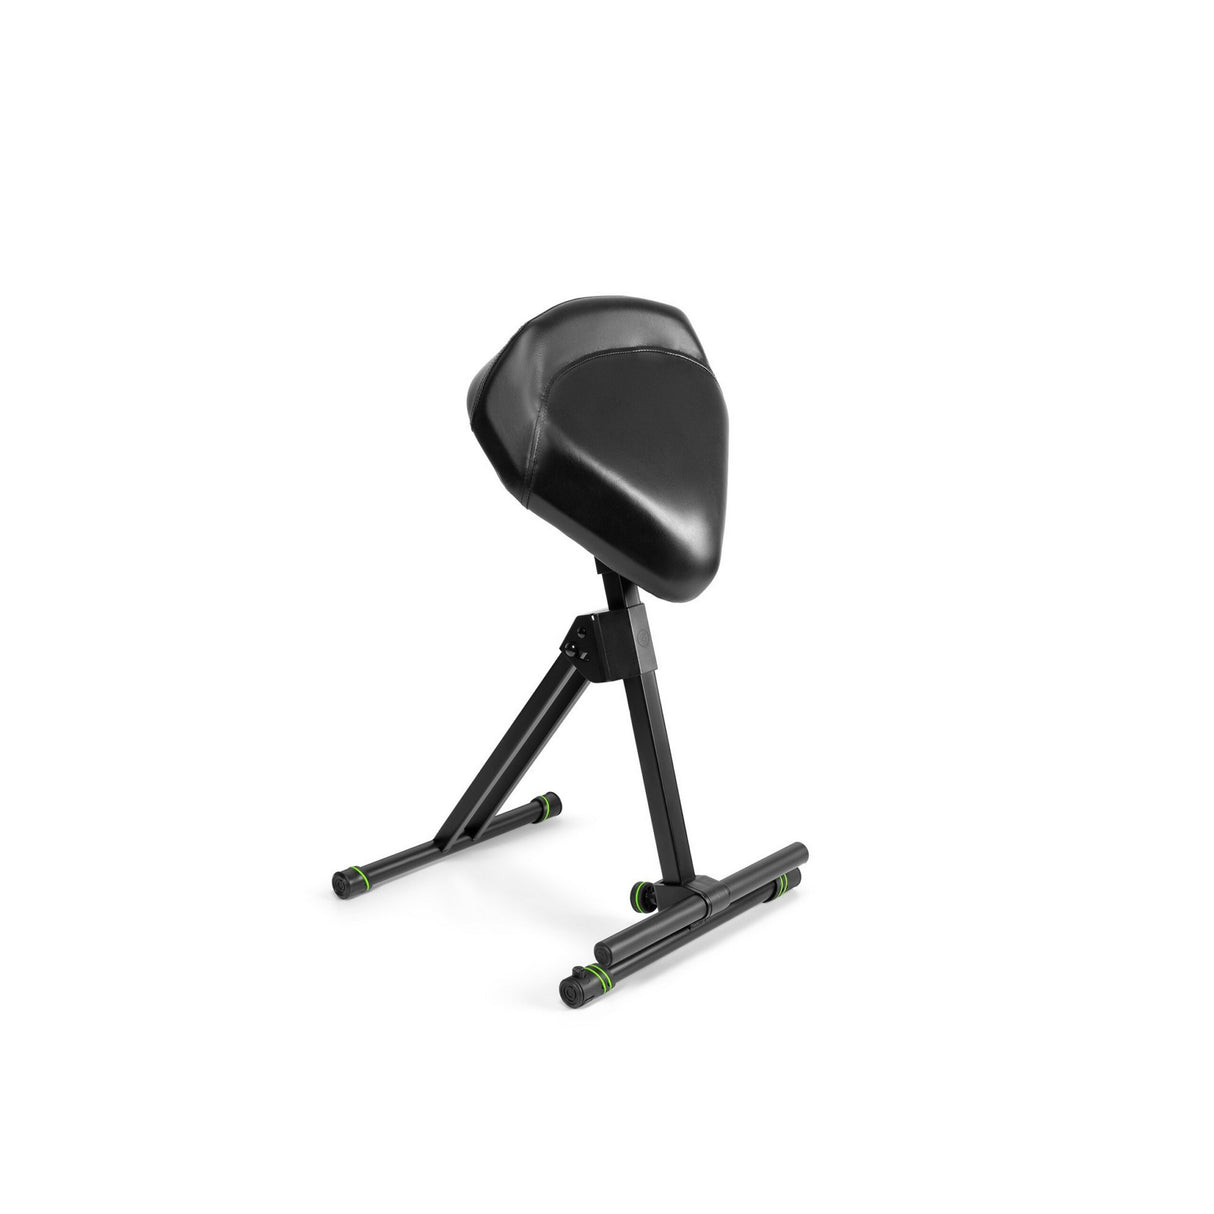 Gravity FM SEAT 1 Height Adjustable Stool with Footrest